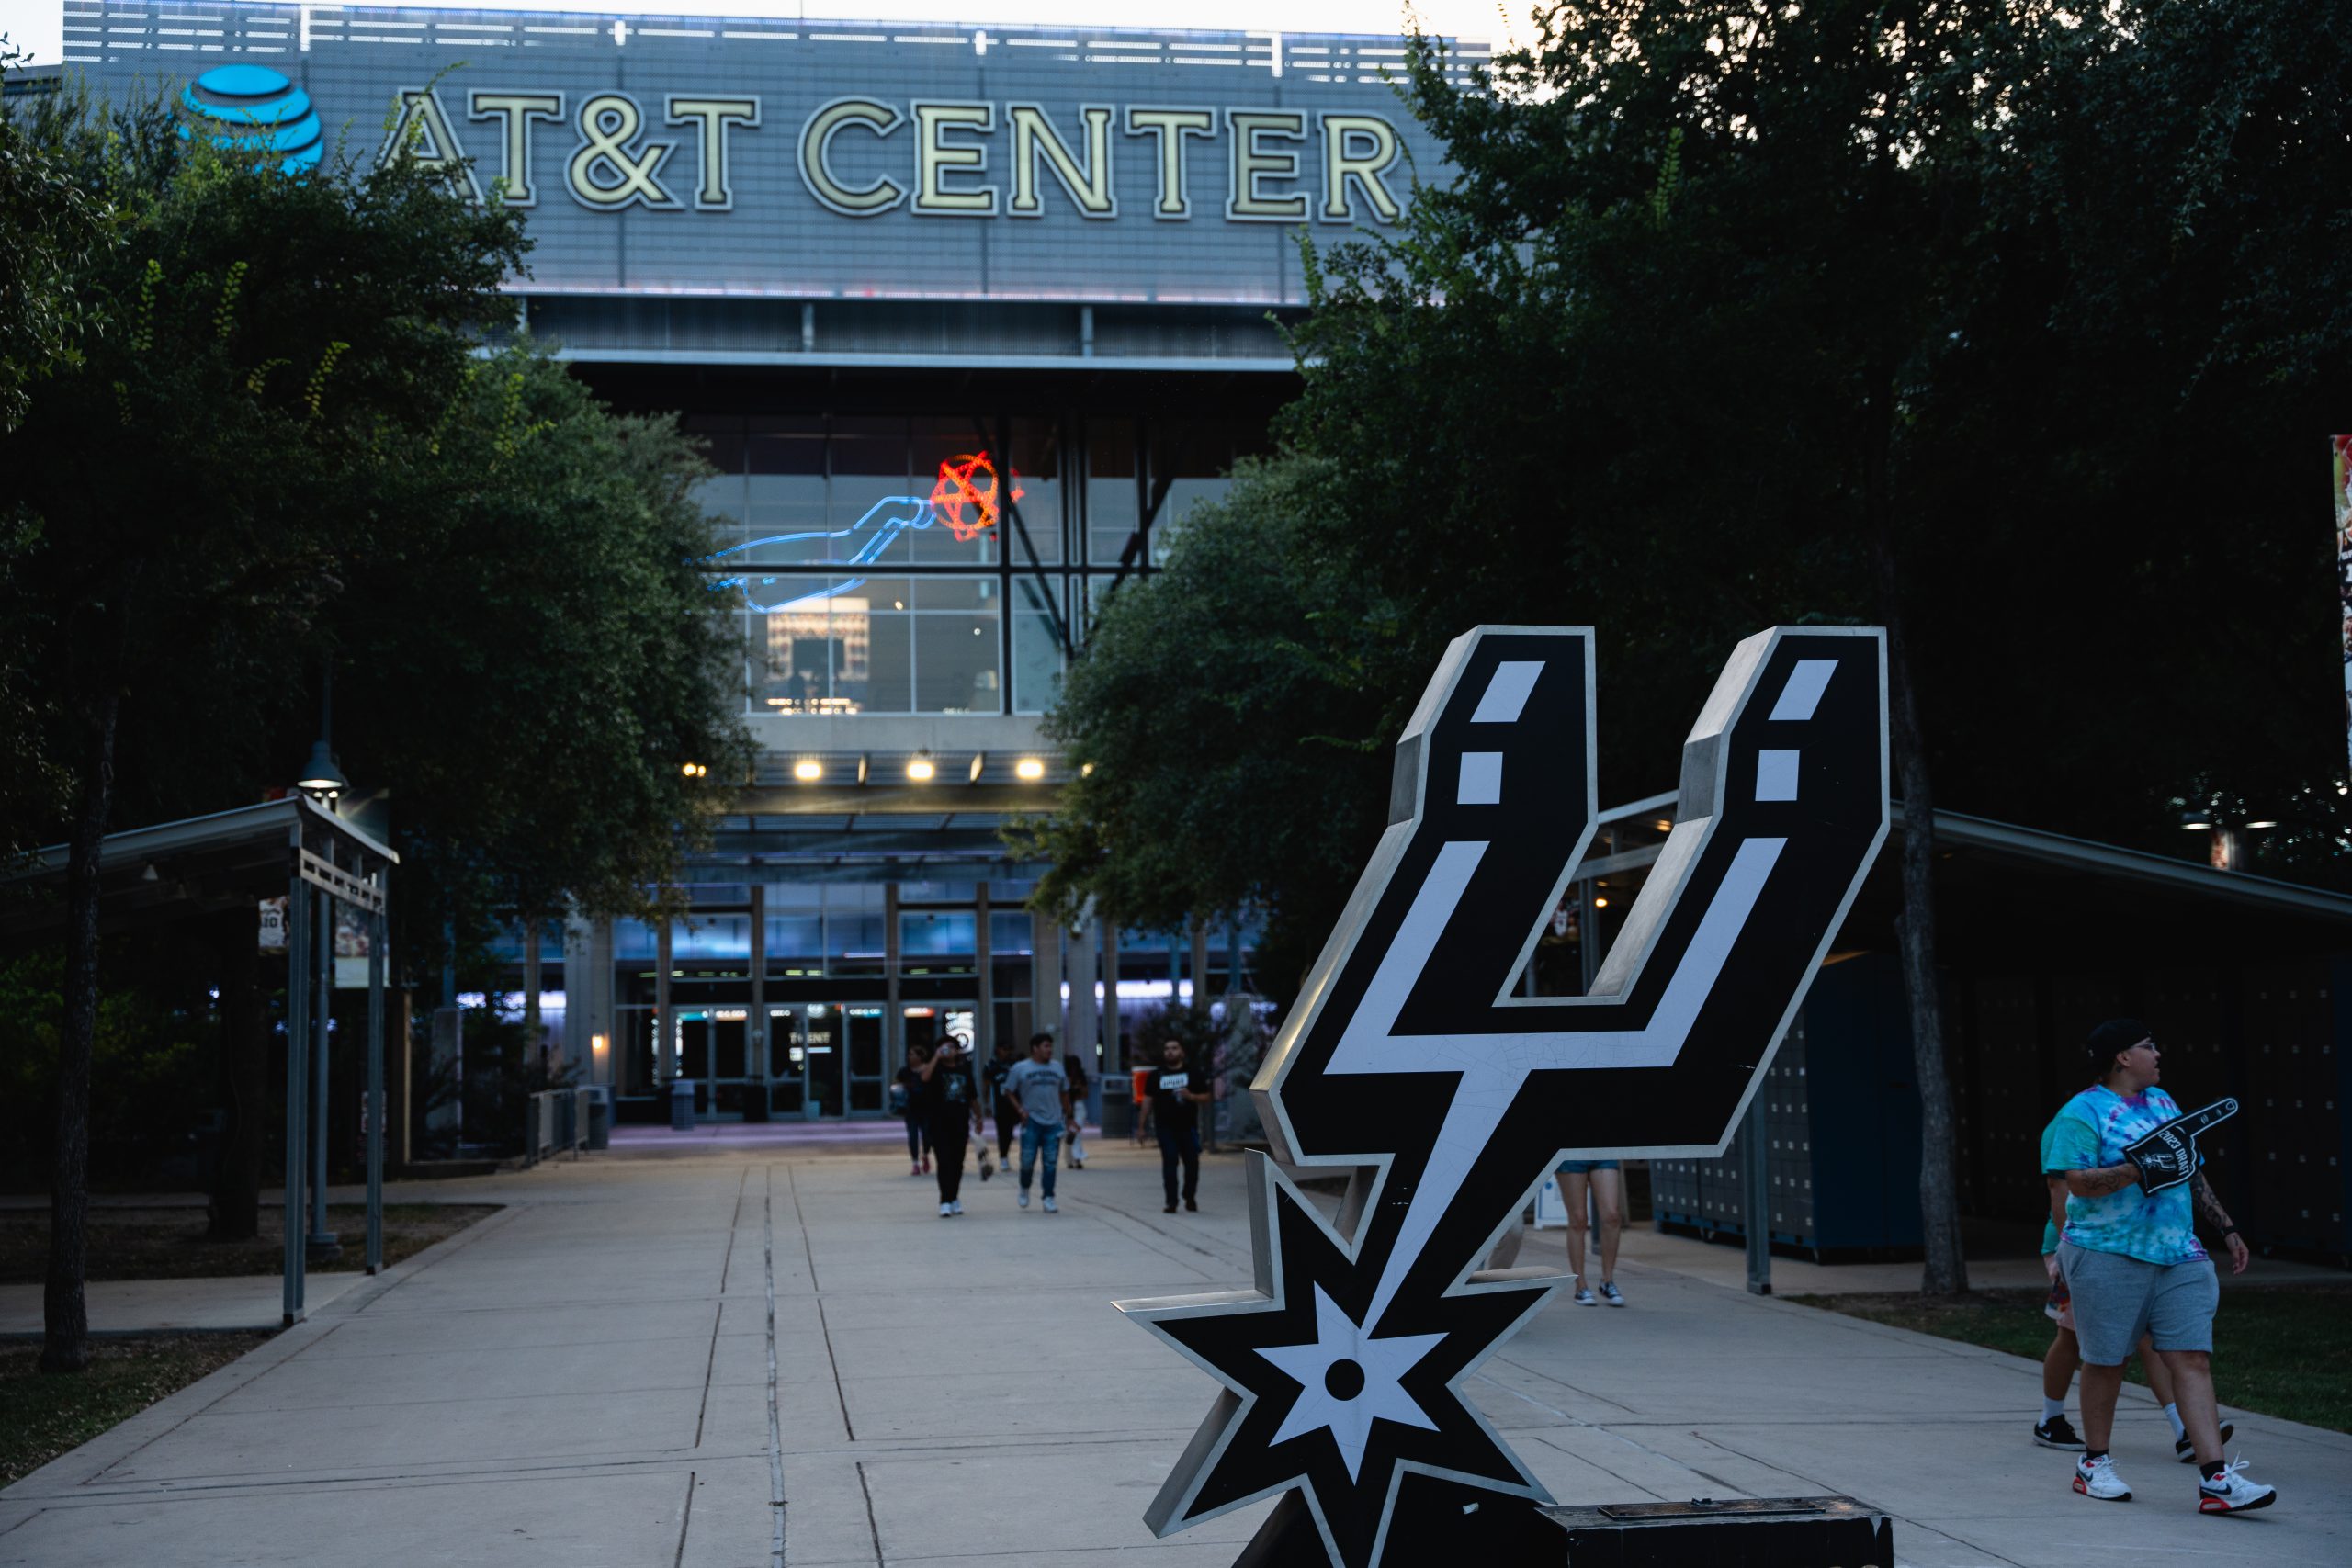 San Antonio Spurs welcome back fans inside the AT&T Center